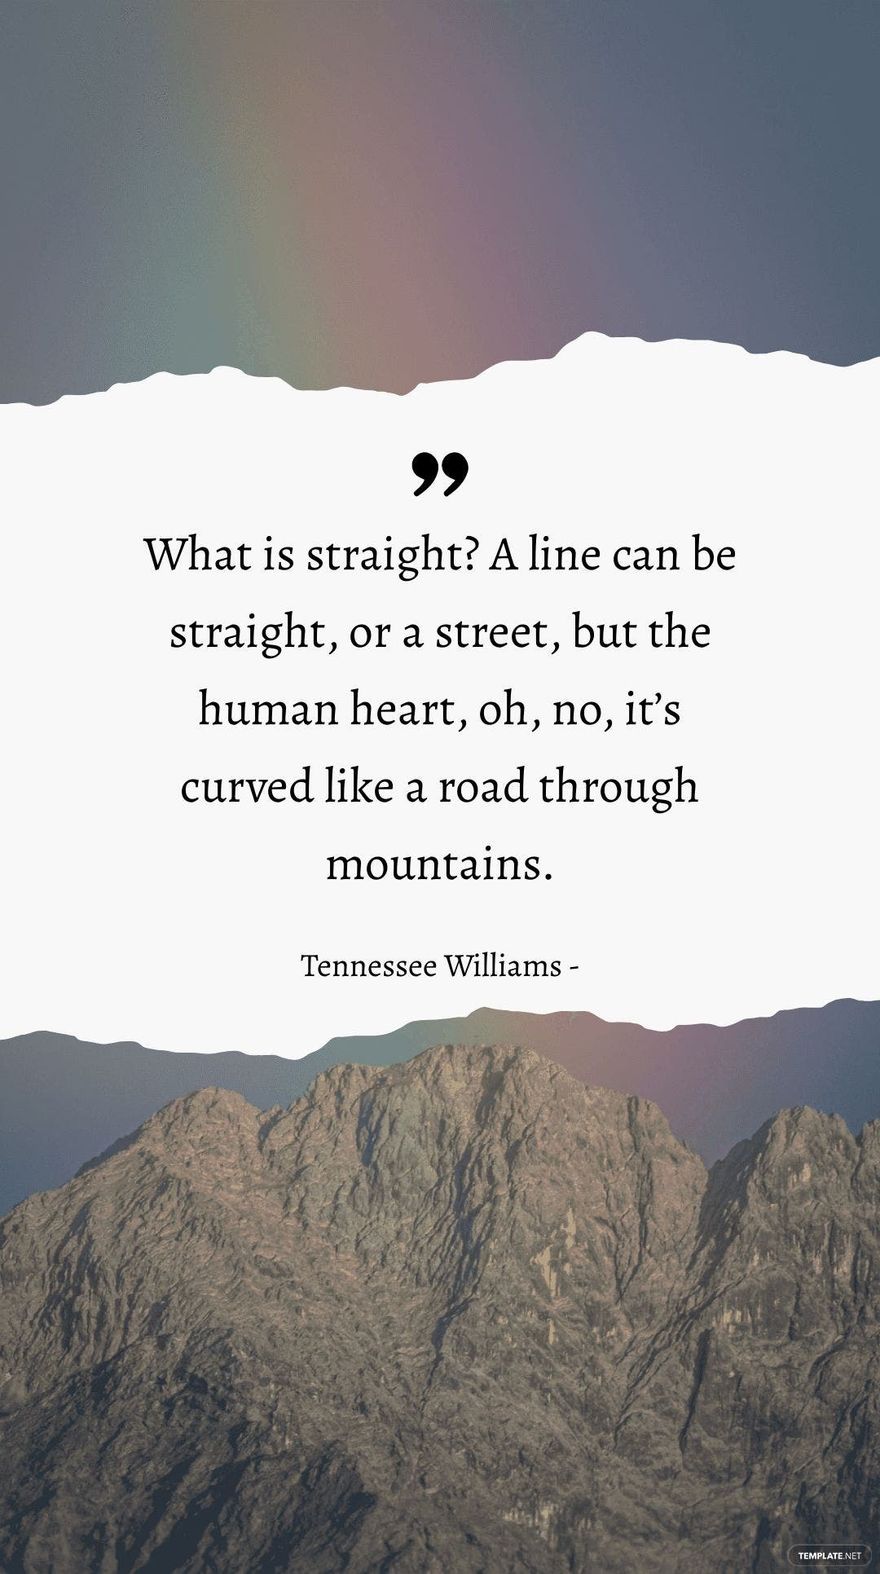 Free Tennessee Williams - What is straight? A line can be straight, or a street, but the human heart, oh, no, it’s curved like a road through mountains.